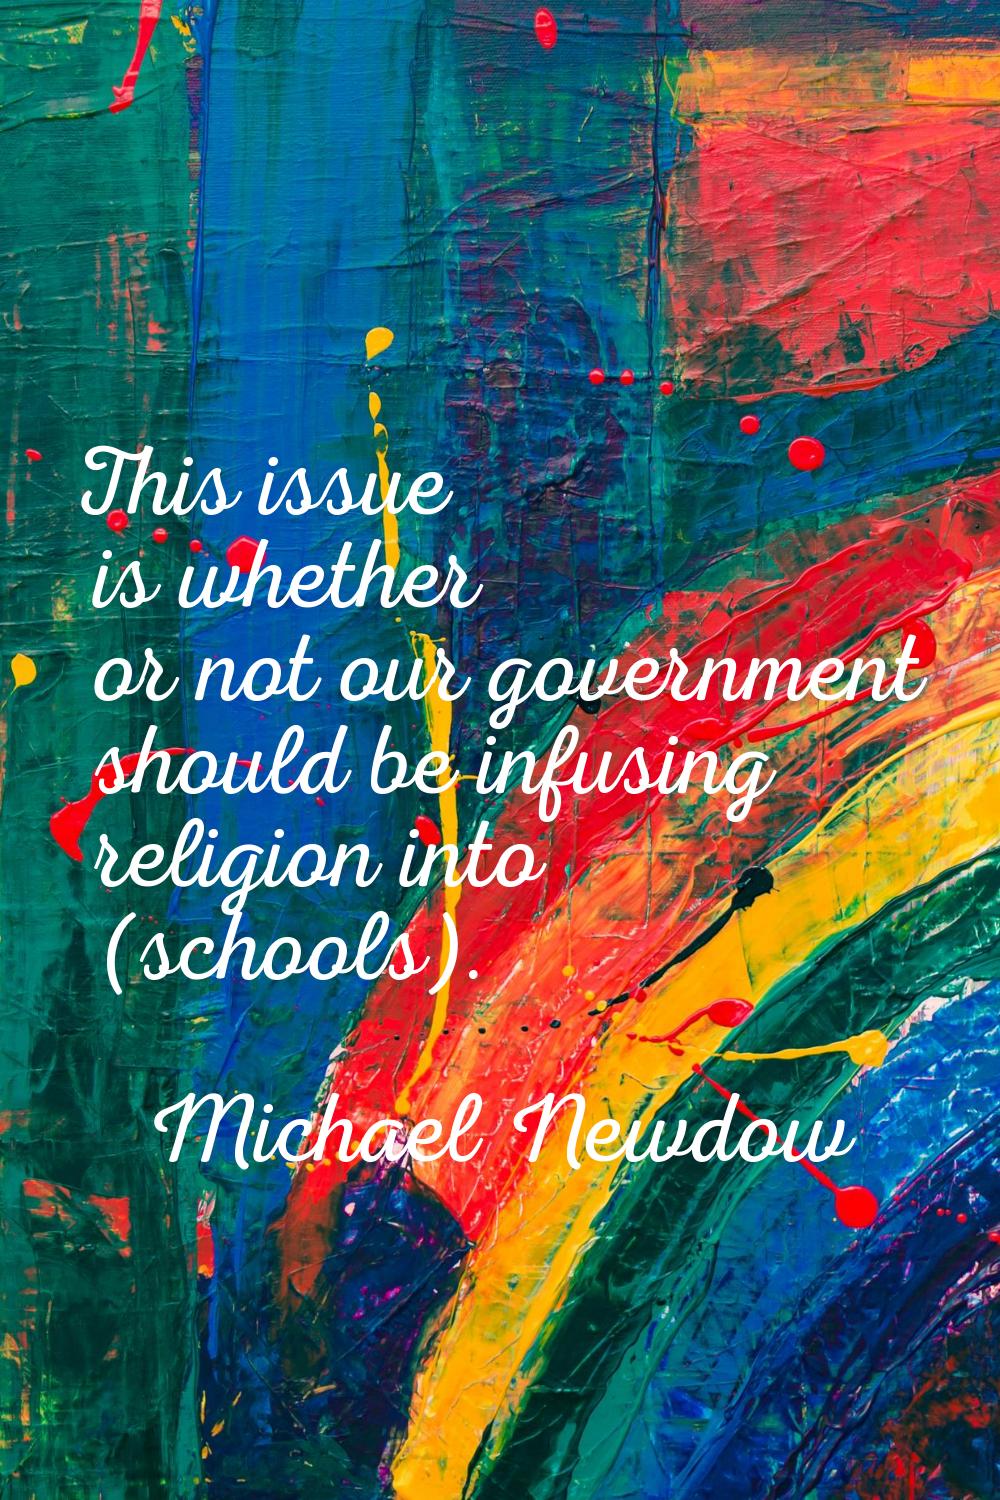 This issue is whether or not our government should be infusing religion into (schools).